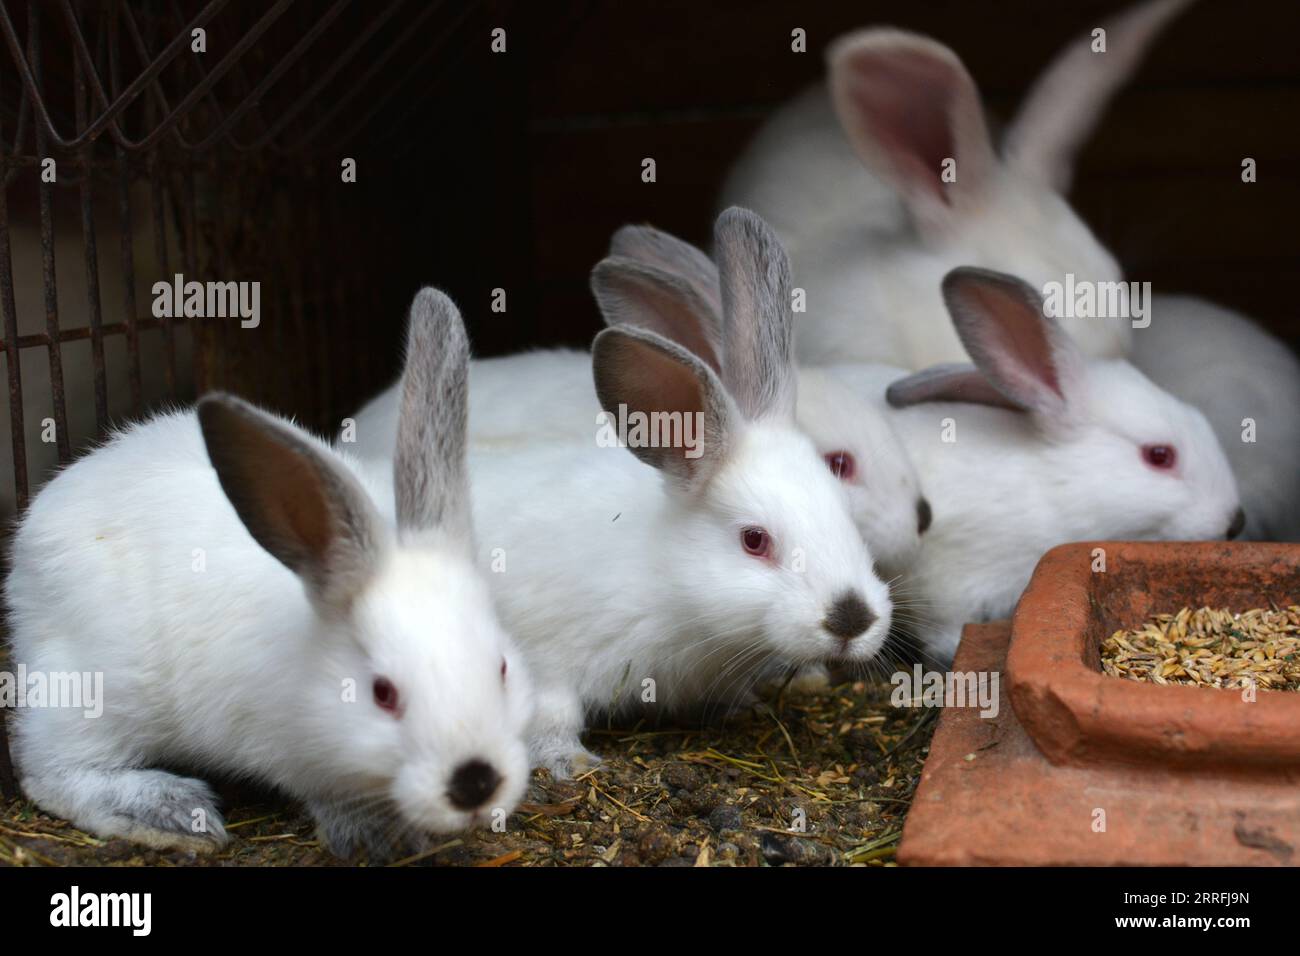 An young rabbits of the Californian breed Stock Photo